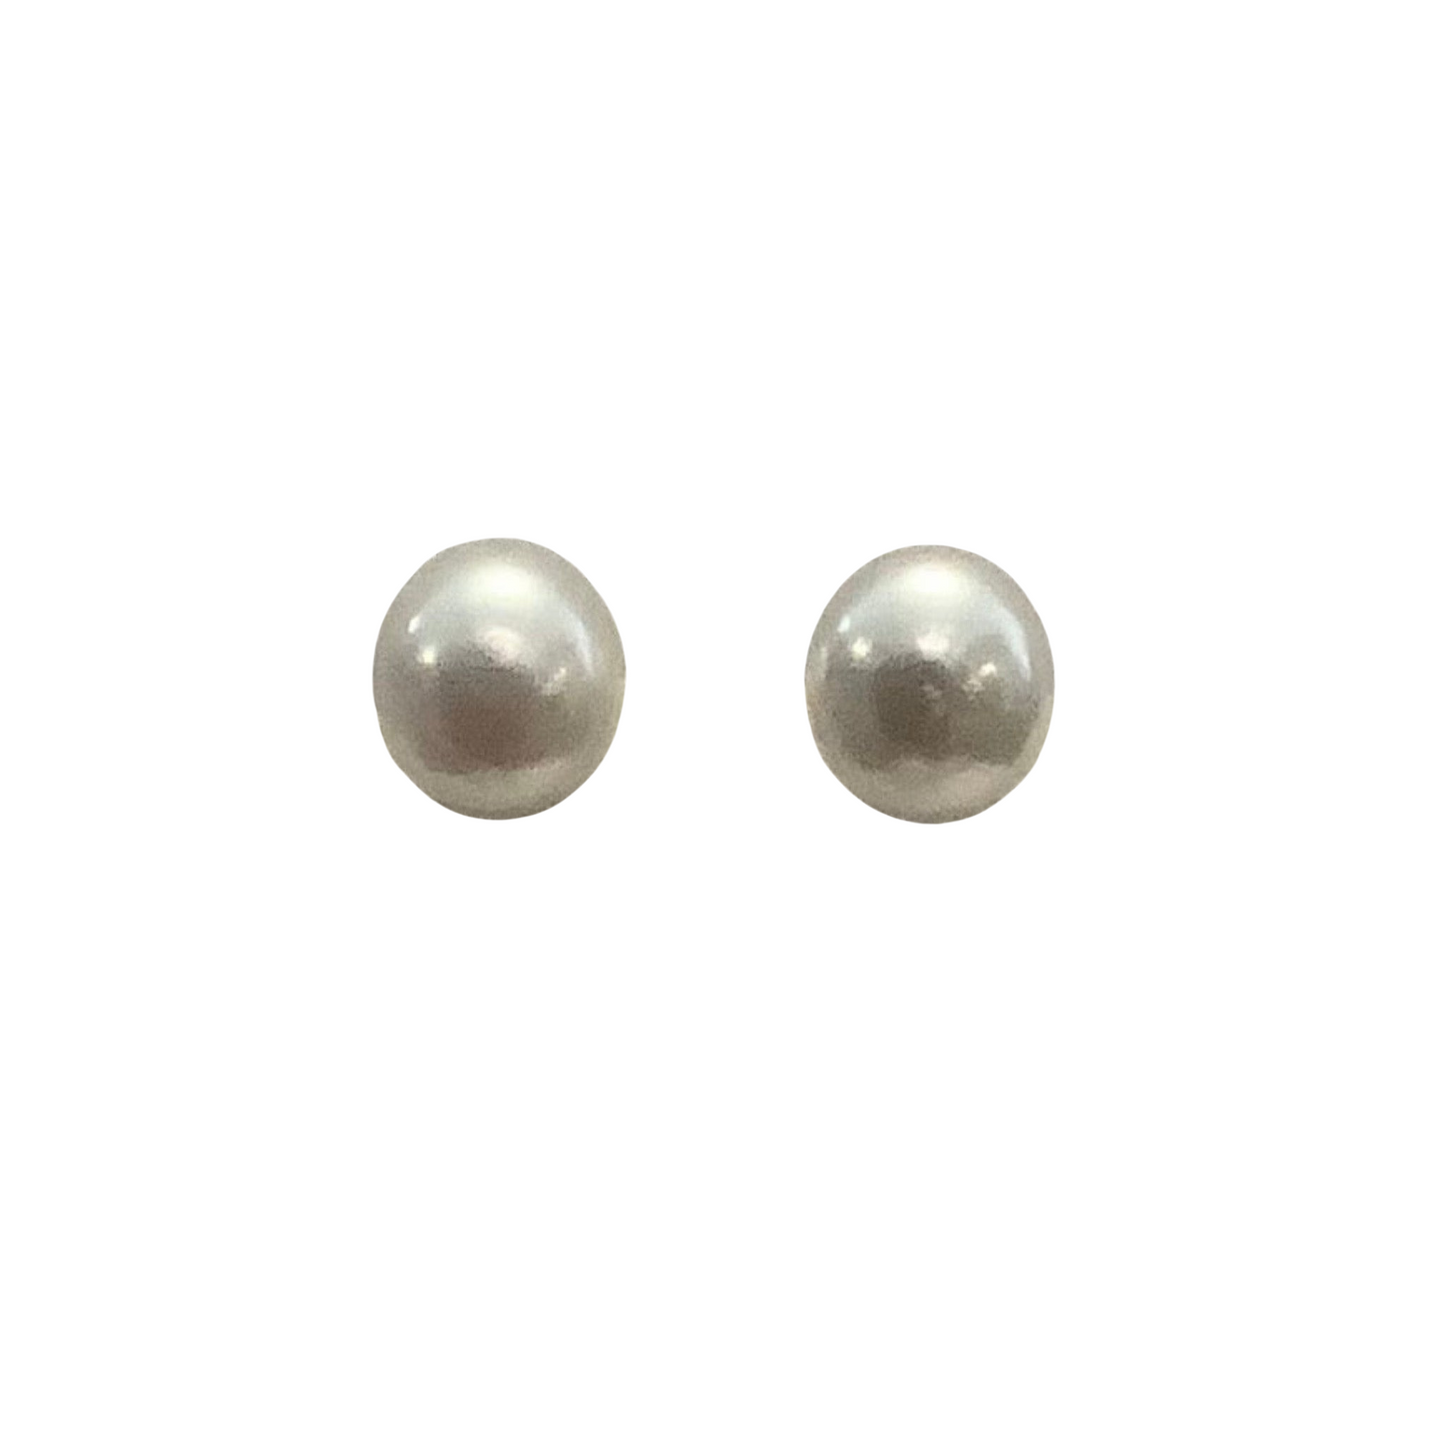 Skosh Brand's 10mm Freshwater Pearl Studs are the perfect accessory for a classic, timeless look. Crafted with genuine fresh water pearls, these earrings will bring a luxurious, sophisticated style to any outfit.